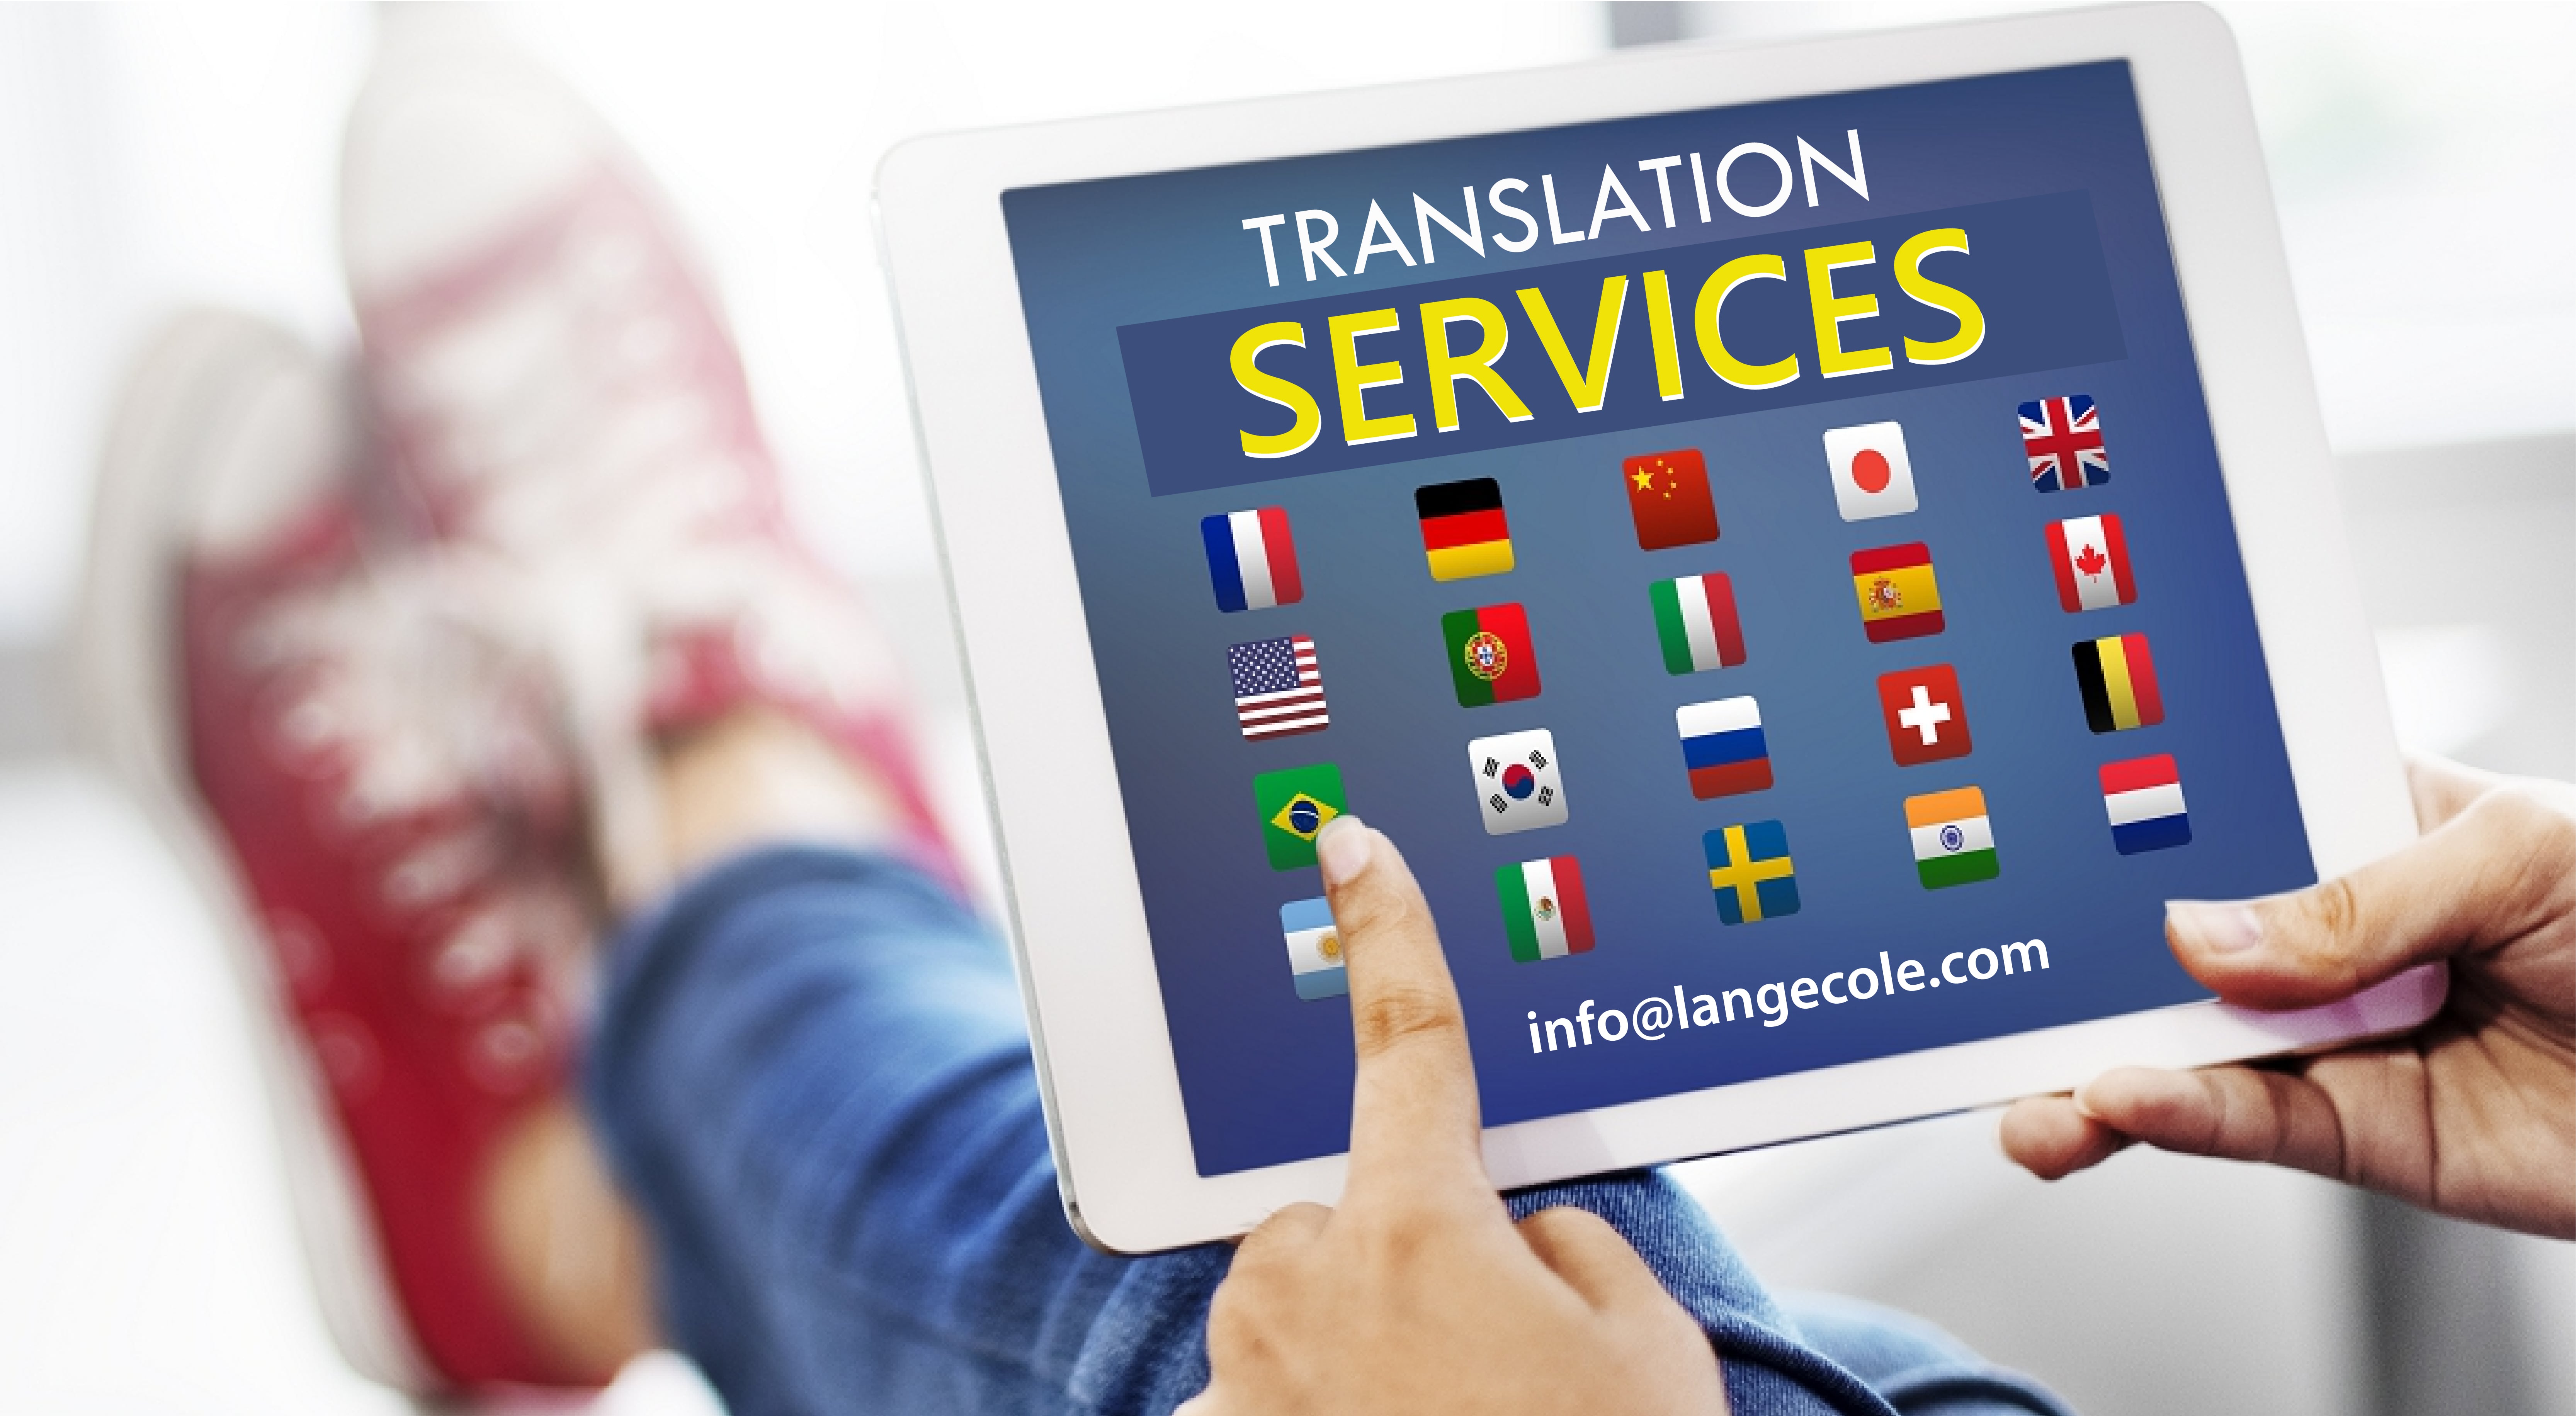 Translating online advertising material into another language